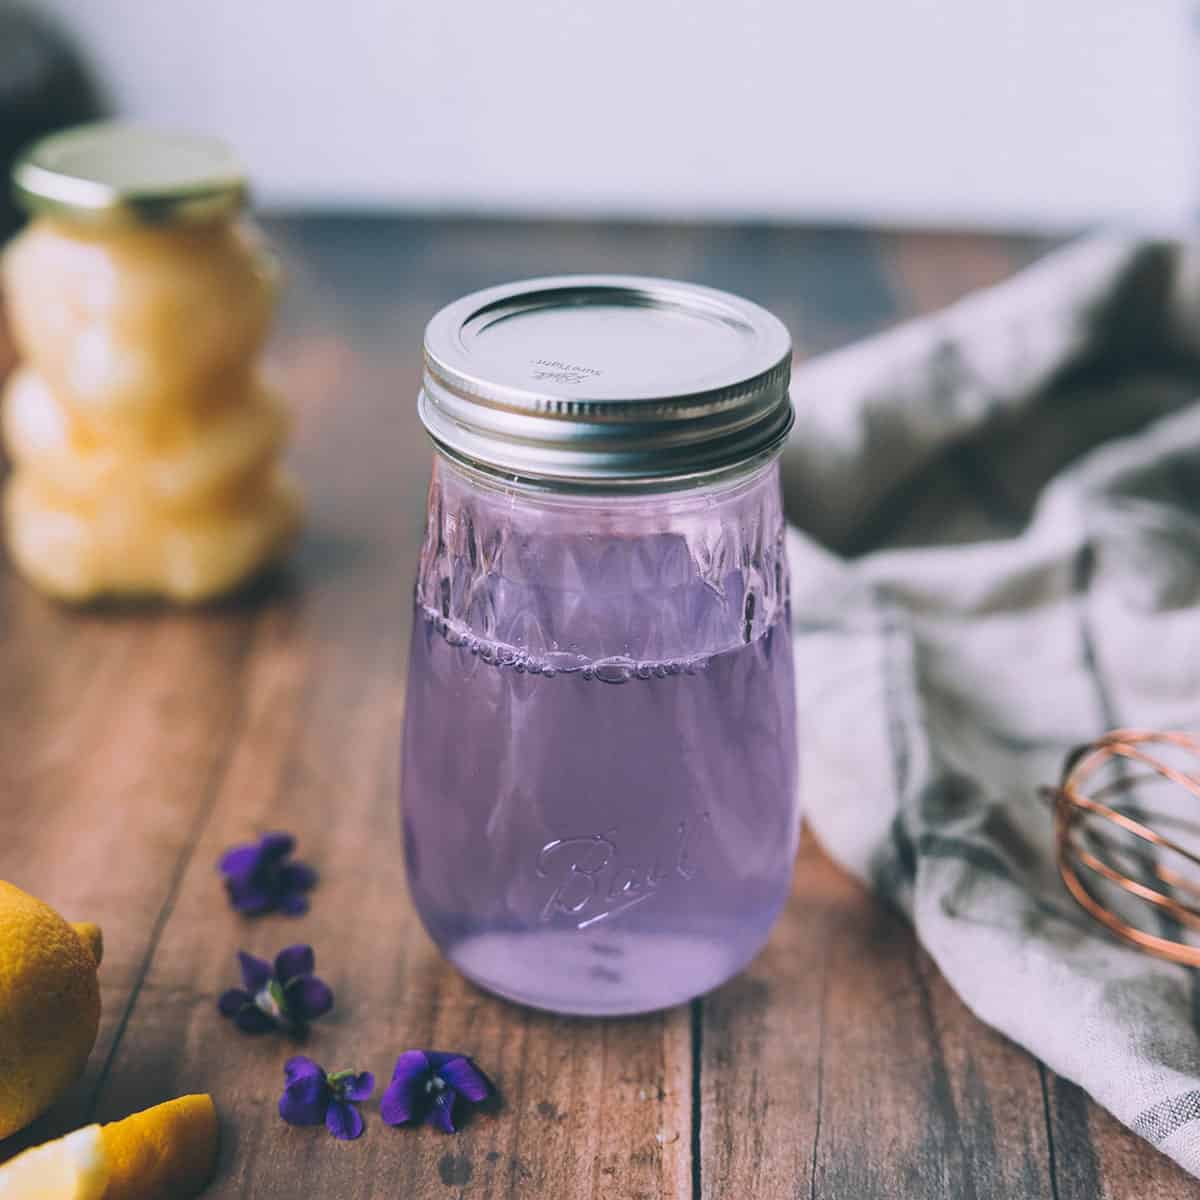 A jar of wild violet syrup that is a light purple color, sitting on a wood surface with a honey bear in the background, and wild violet flowers surrounding.